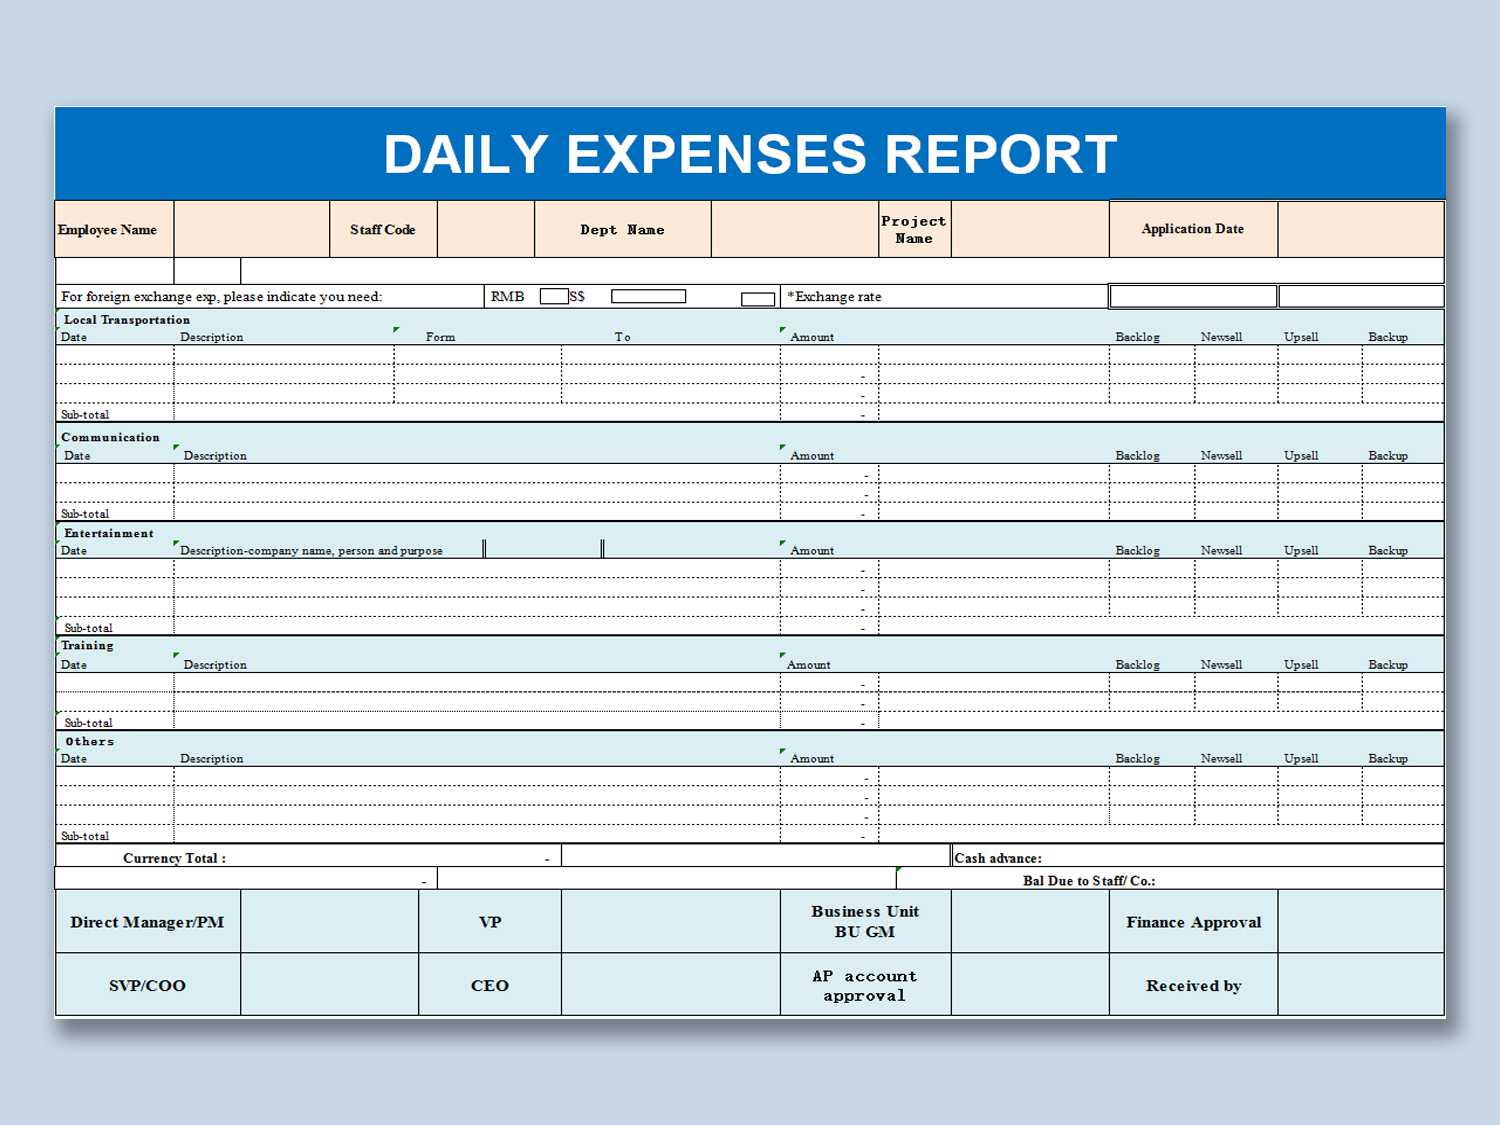 Wps Template – Free Download Writer, Presentation Throughout Expense Report Template Xls